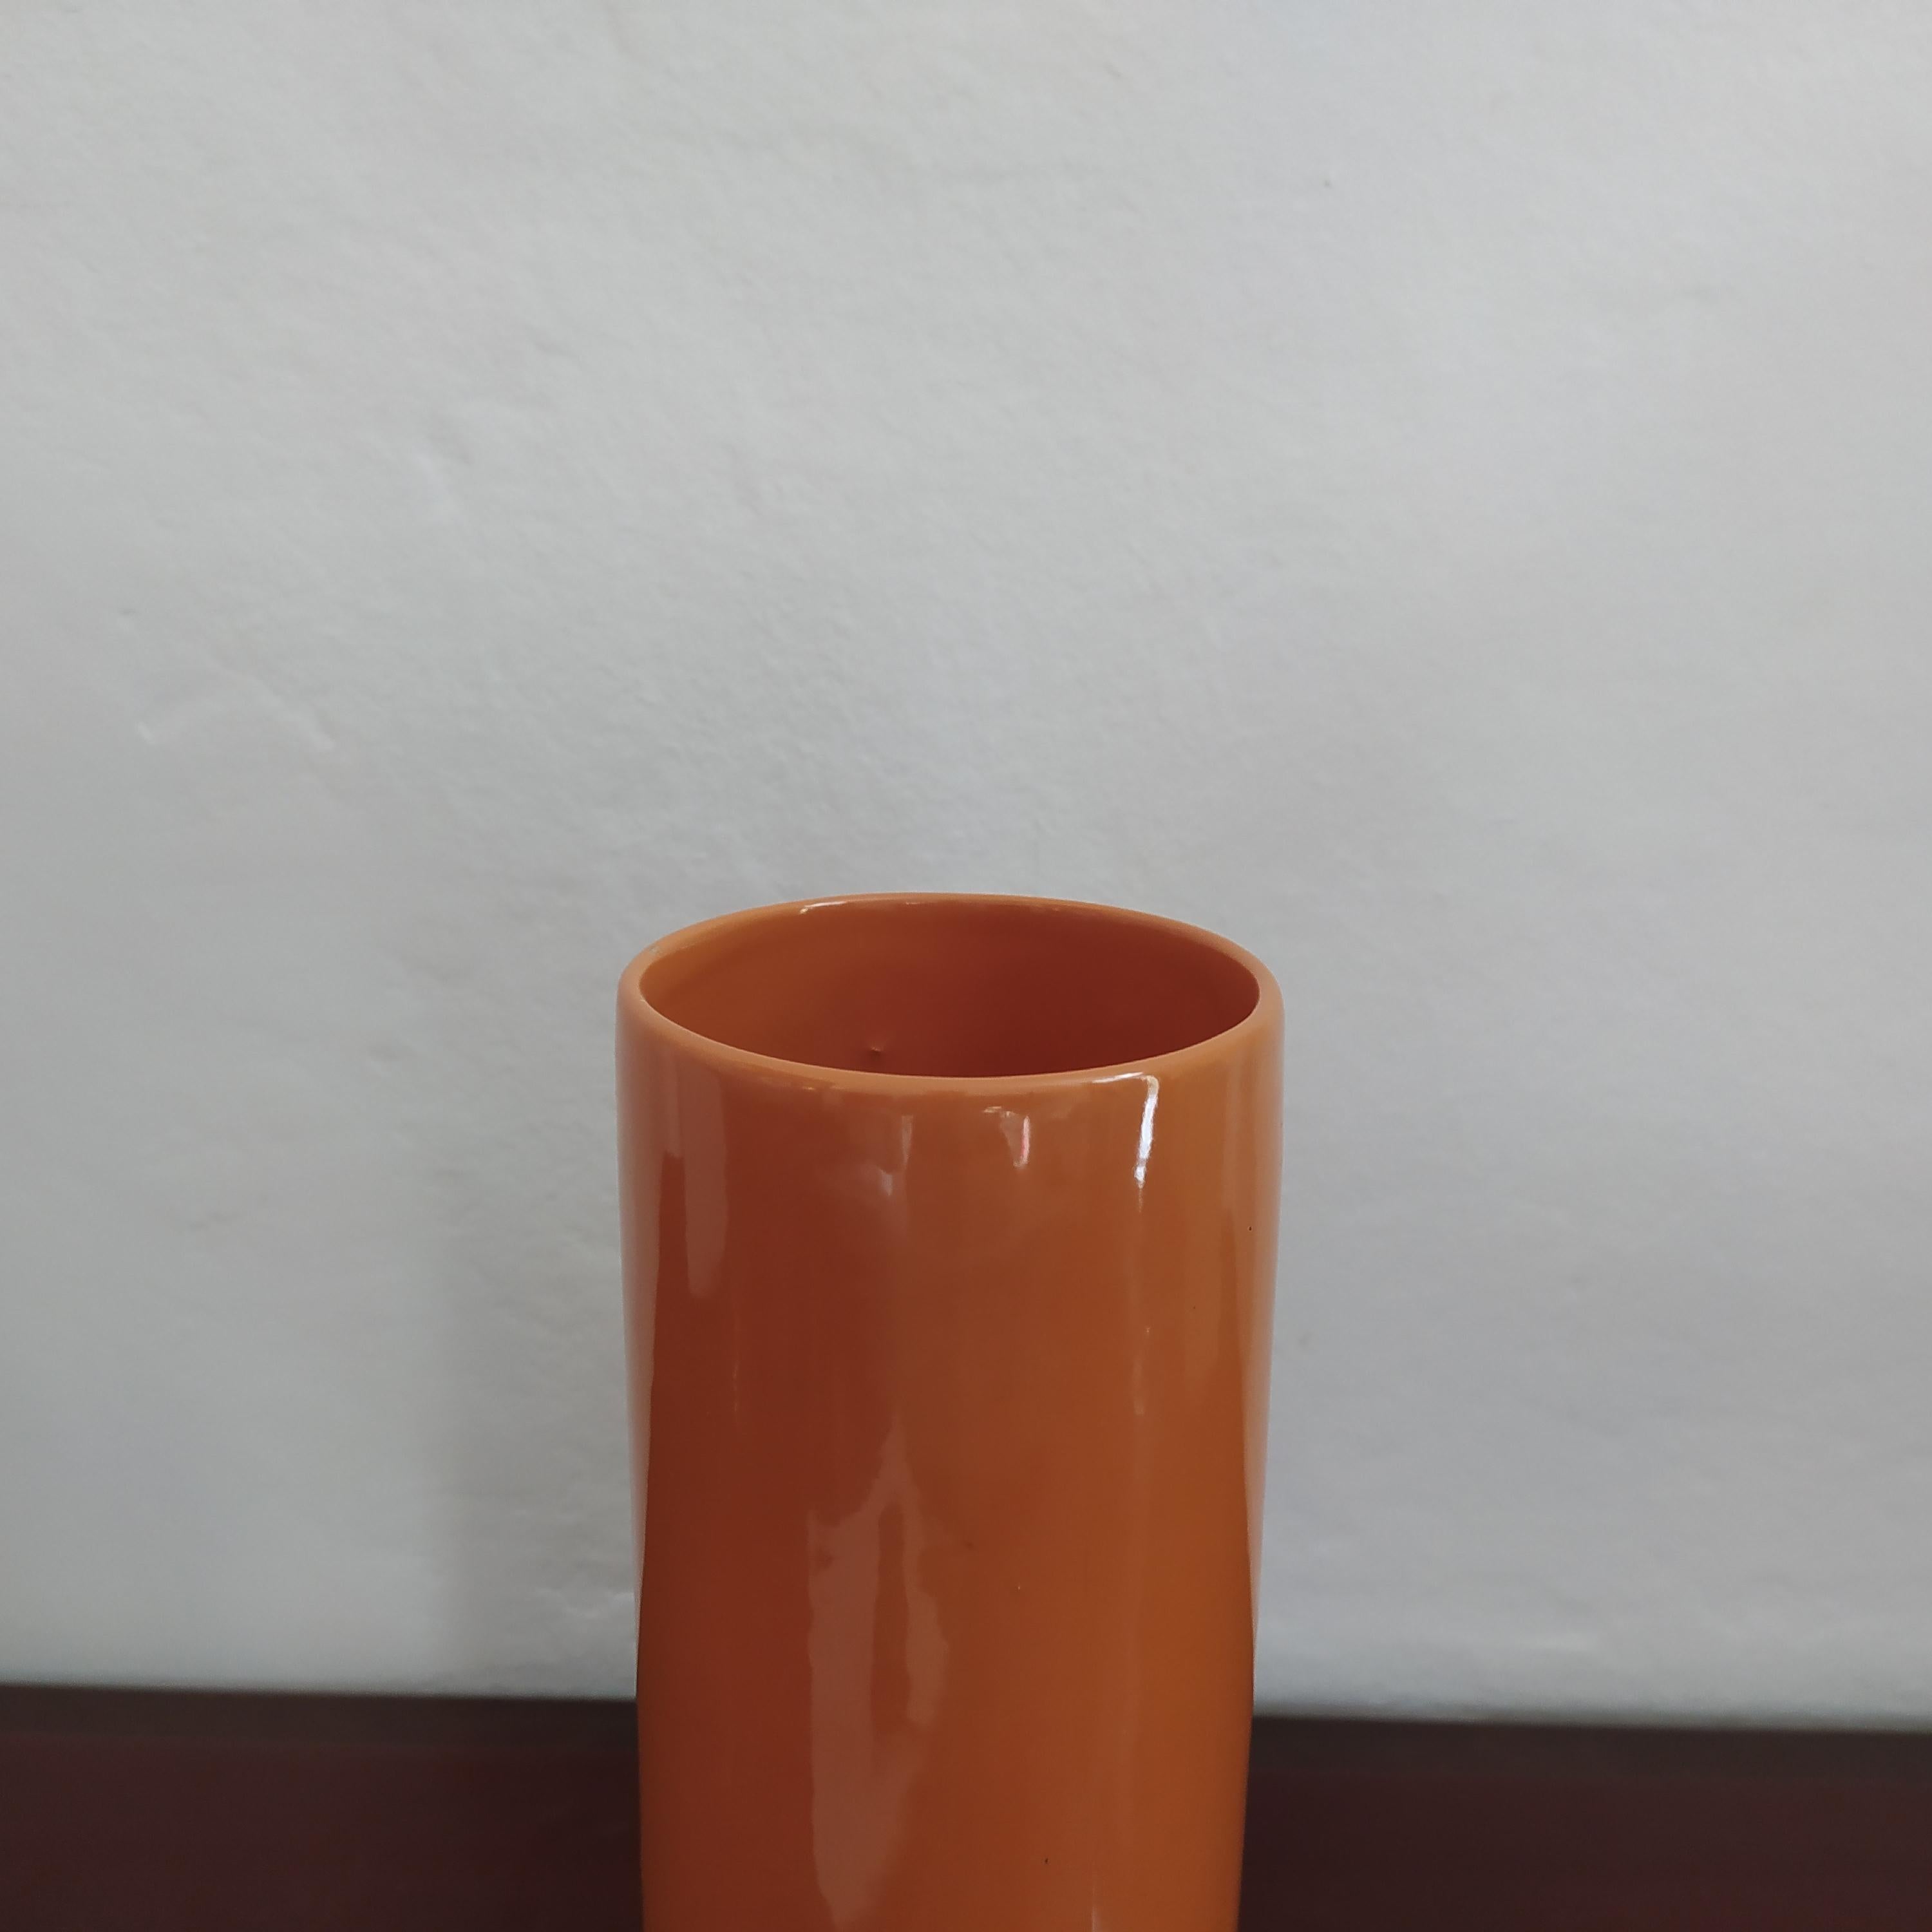 European 1970s Astonishing Space Age Orange Vase by Gabbianelli. Made in Italy For Sale